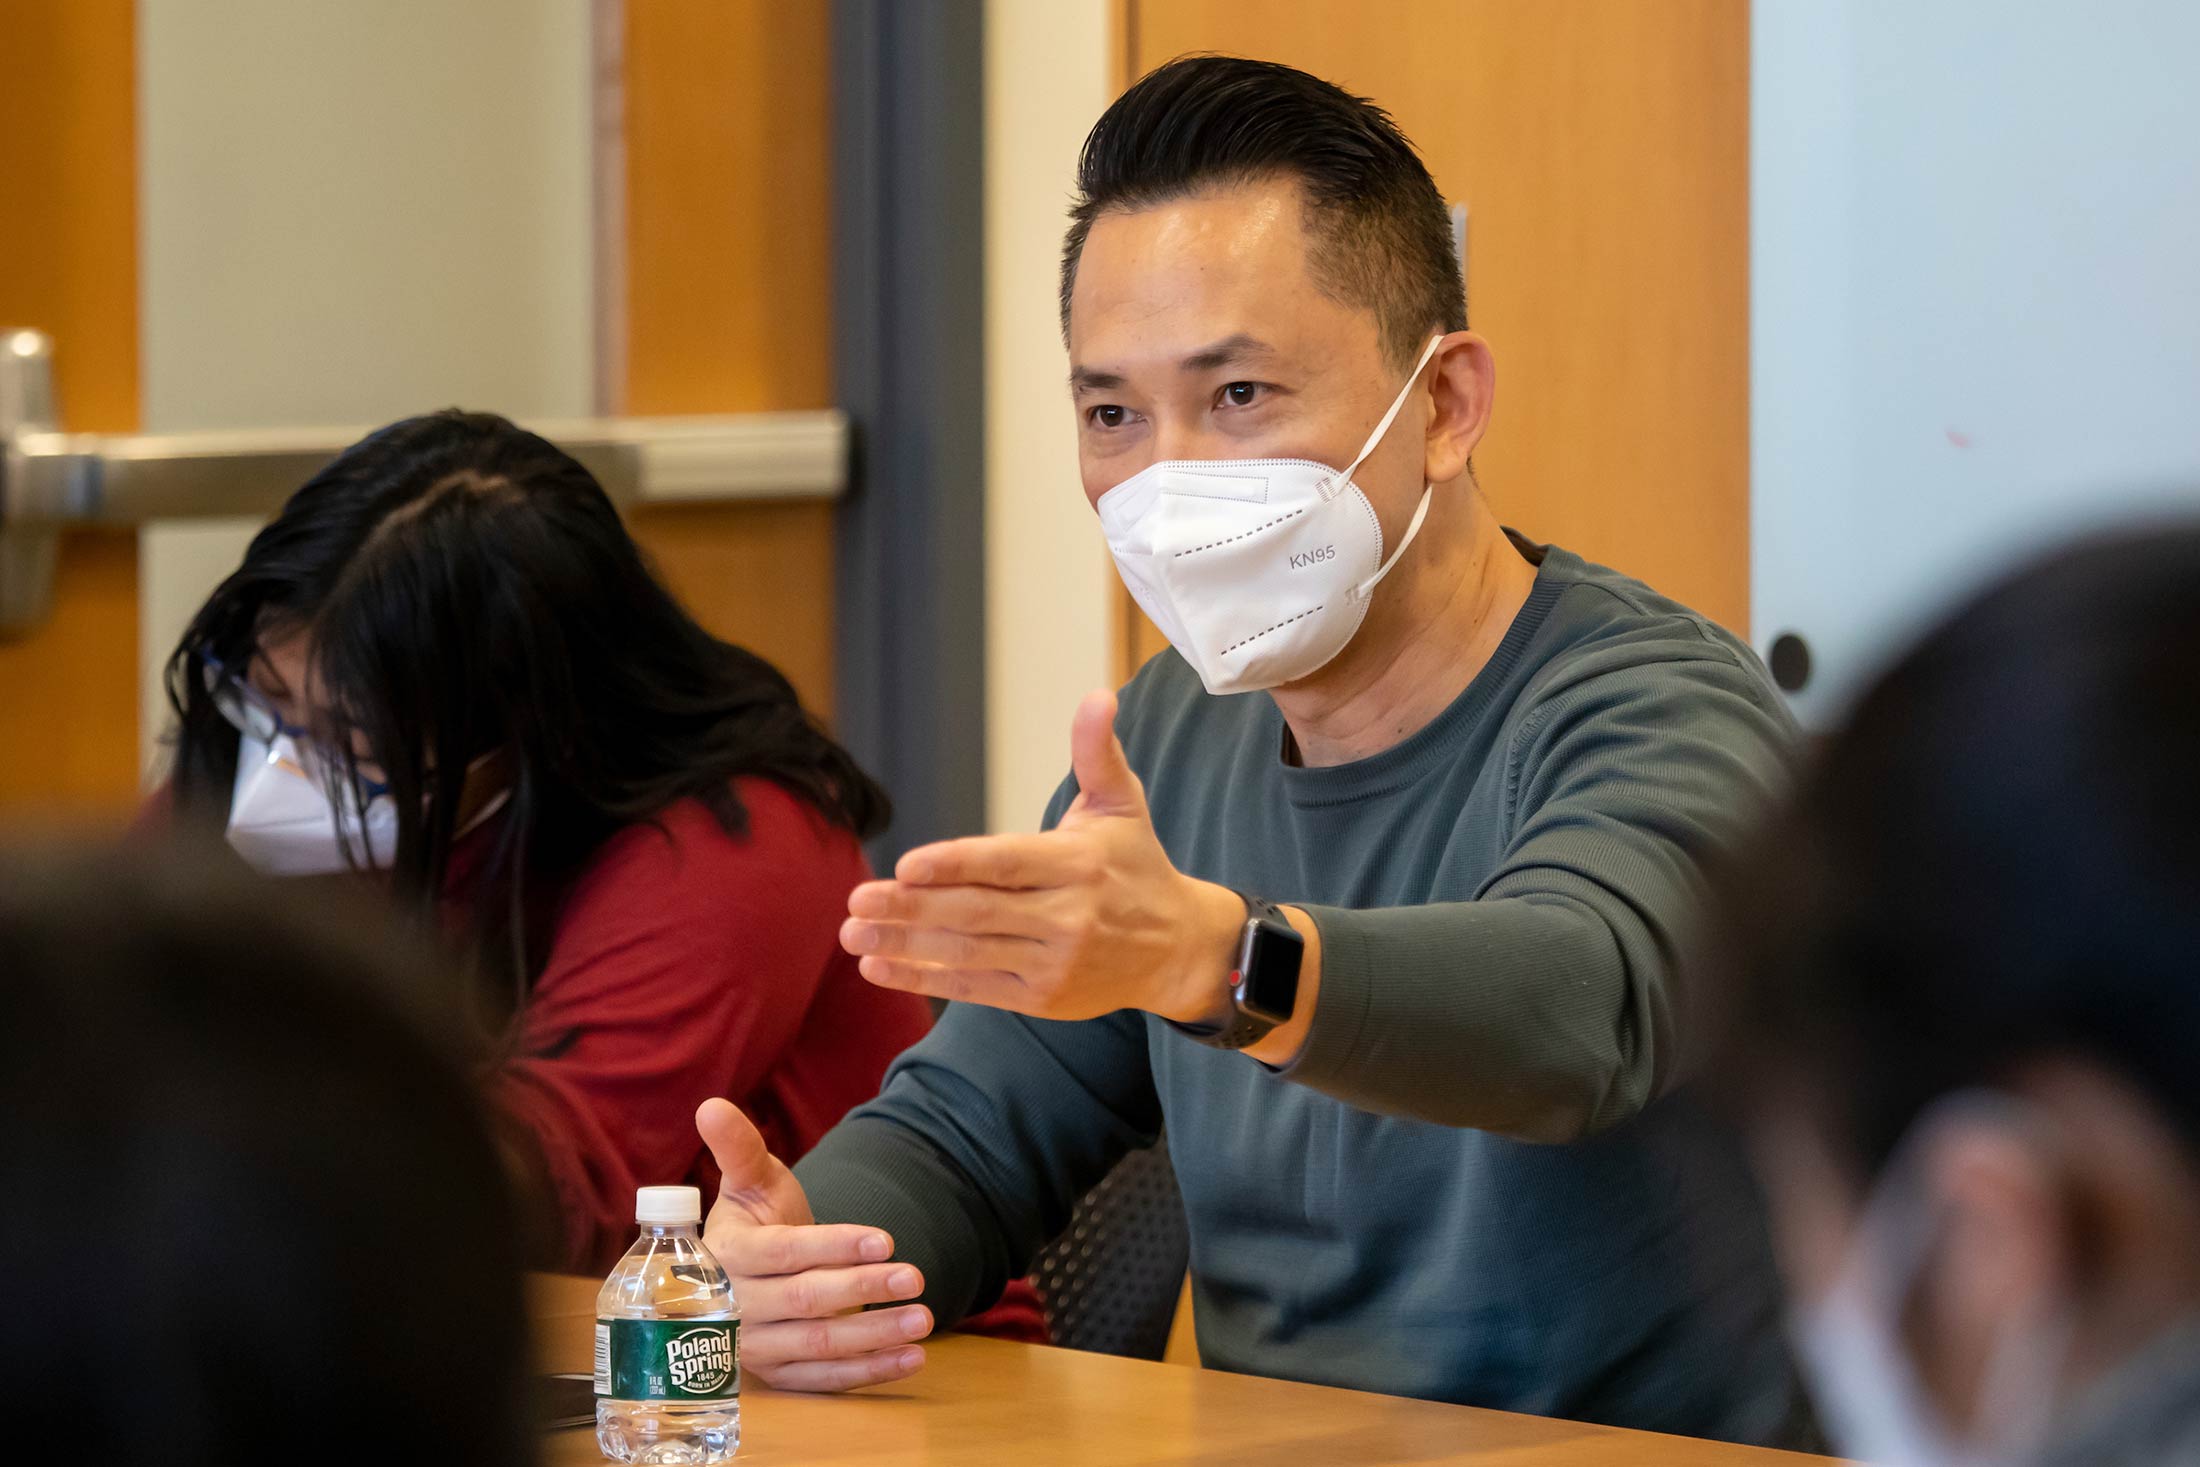 Viet Thanh Nguyen, wearing a kn95 mask, seated at a table, gestures while talking